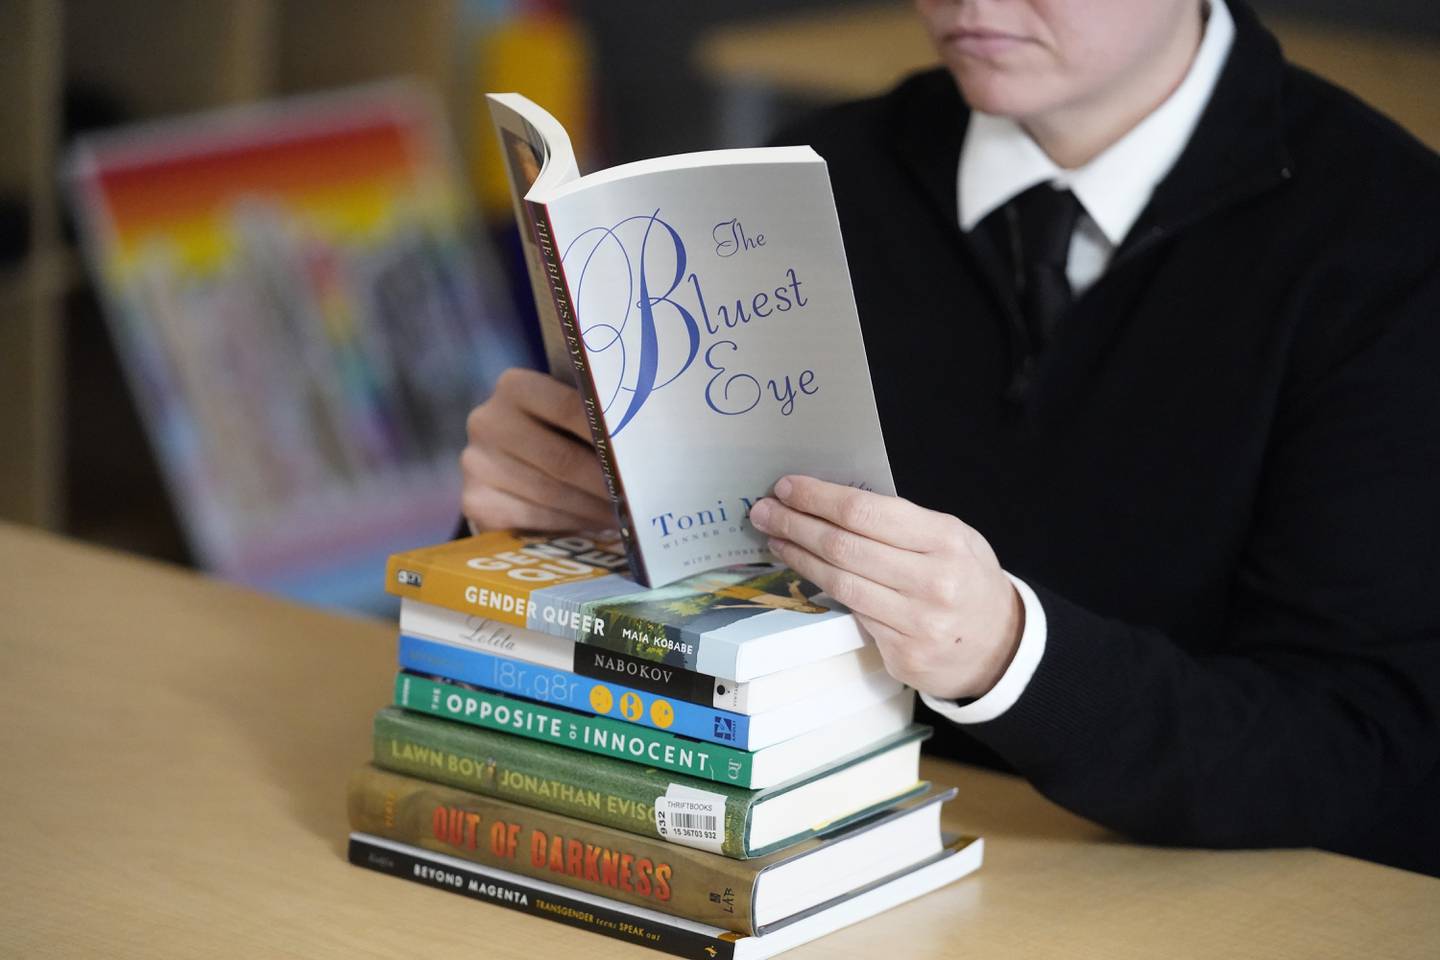 FILE - Amanda Darrow, director of youth, family and education programs at the Utah Pride Center, poses with books, including "The Bluest Eye," by Toni Morrison, that have been the subject of complaints from parents in Salt Lake City on Dec. 16, 2021. The wave of book bannings around the country has reached a level not seen for decades. (AP Photo/Rick Bowmer, File)